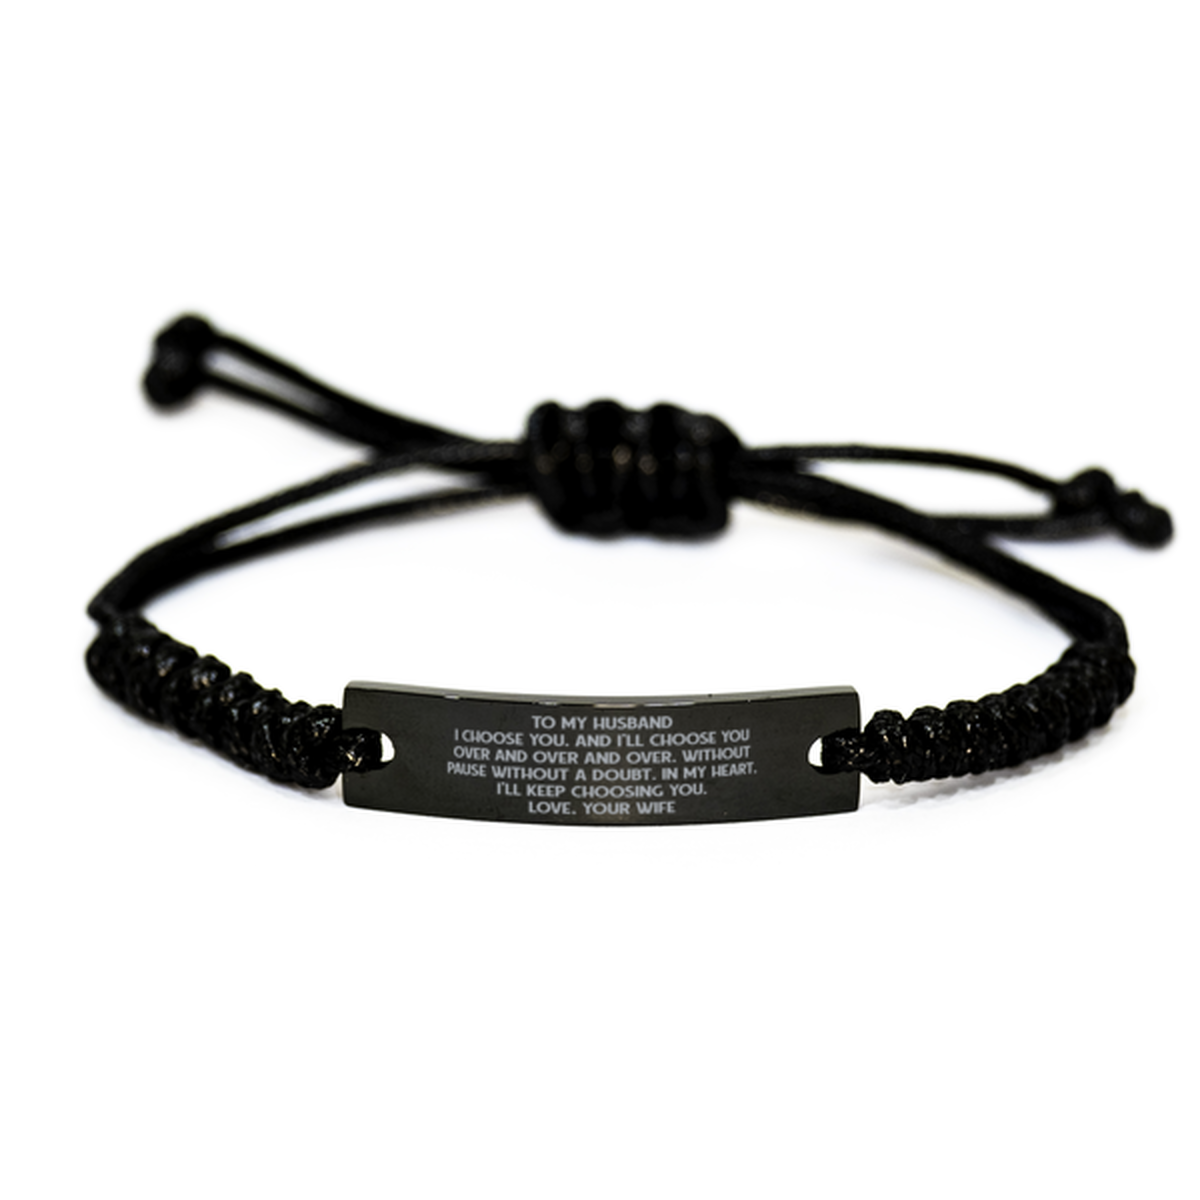 To My Husband Rope Bracelet, I'll Keep Choosing You, Anniversary Gifts For Husband From Wife, Birthday Gifts For Men